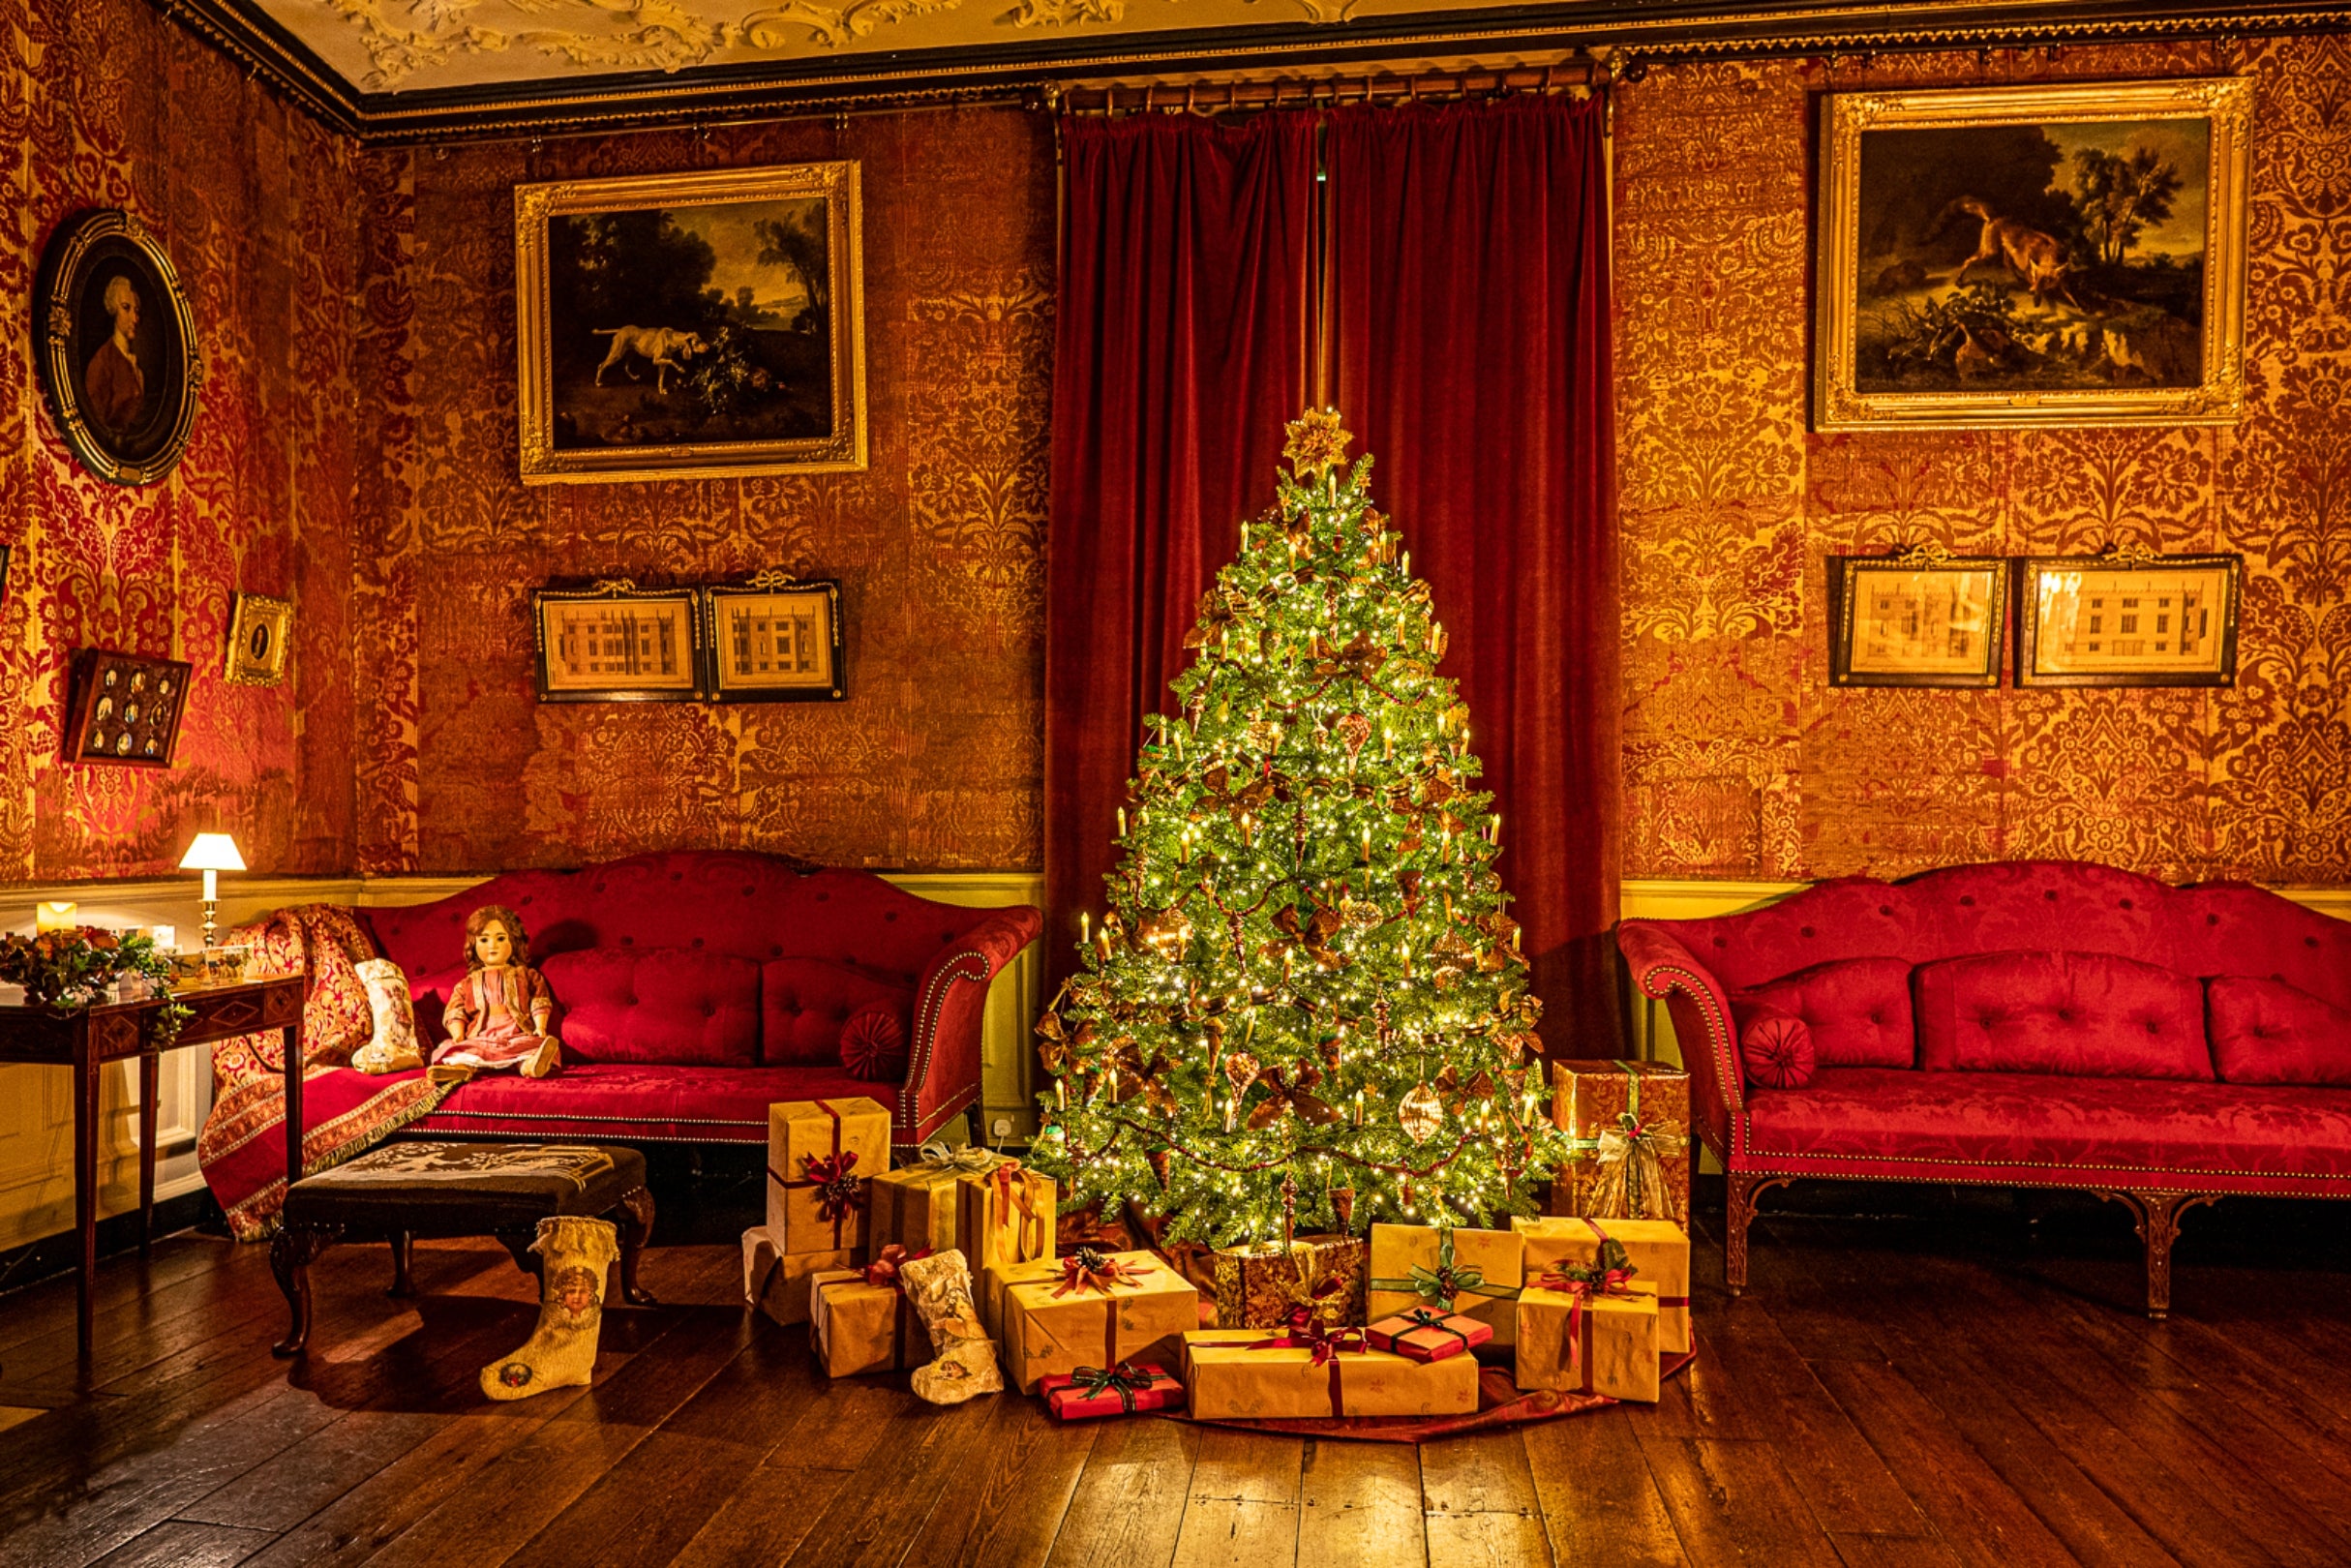 26 interesting facts about Christmas